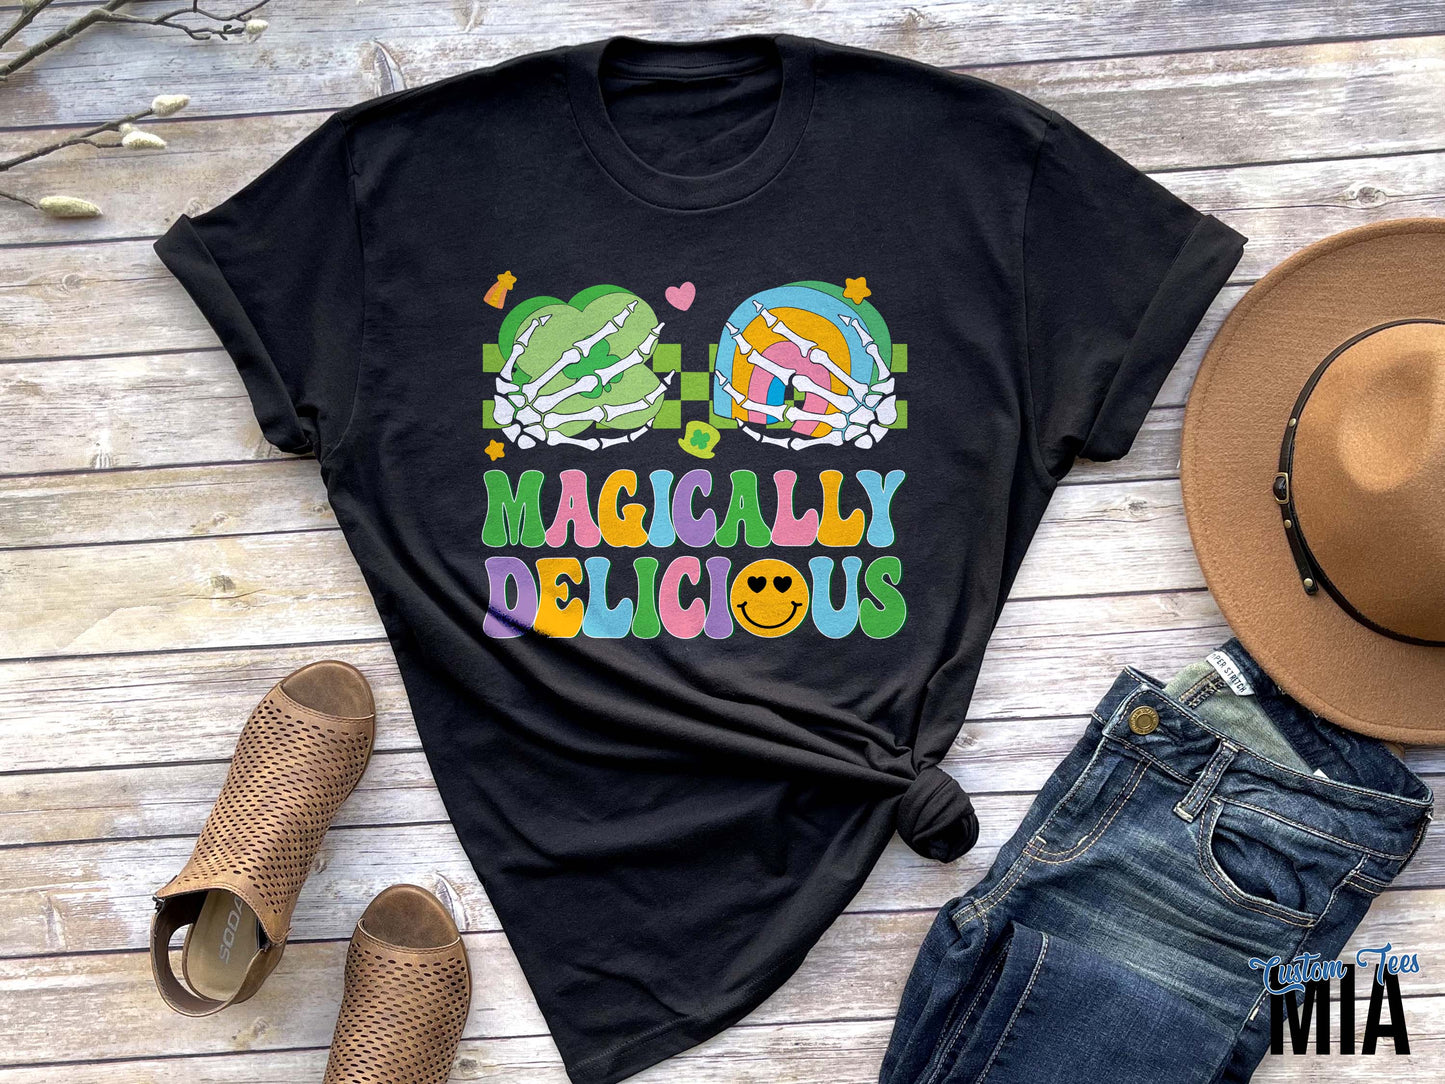 Magically Delicious St. Patrick's Day Shirt